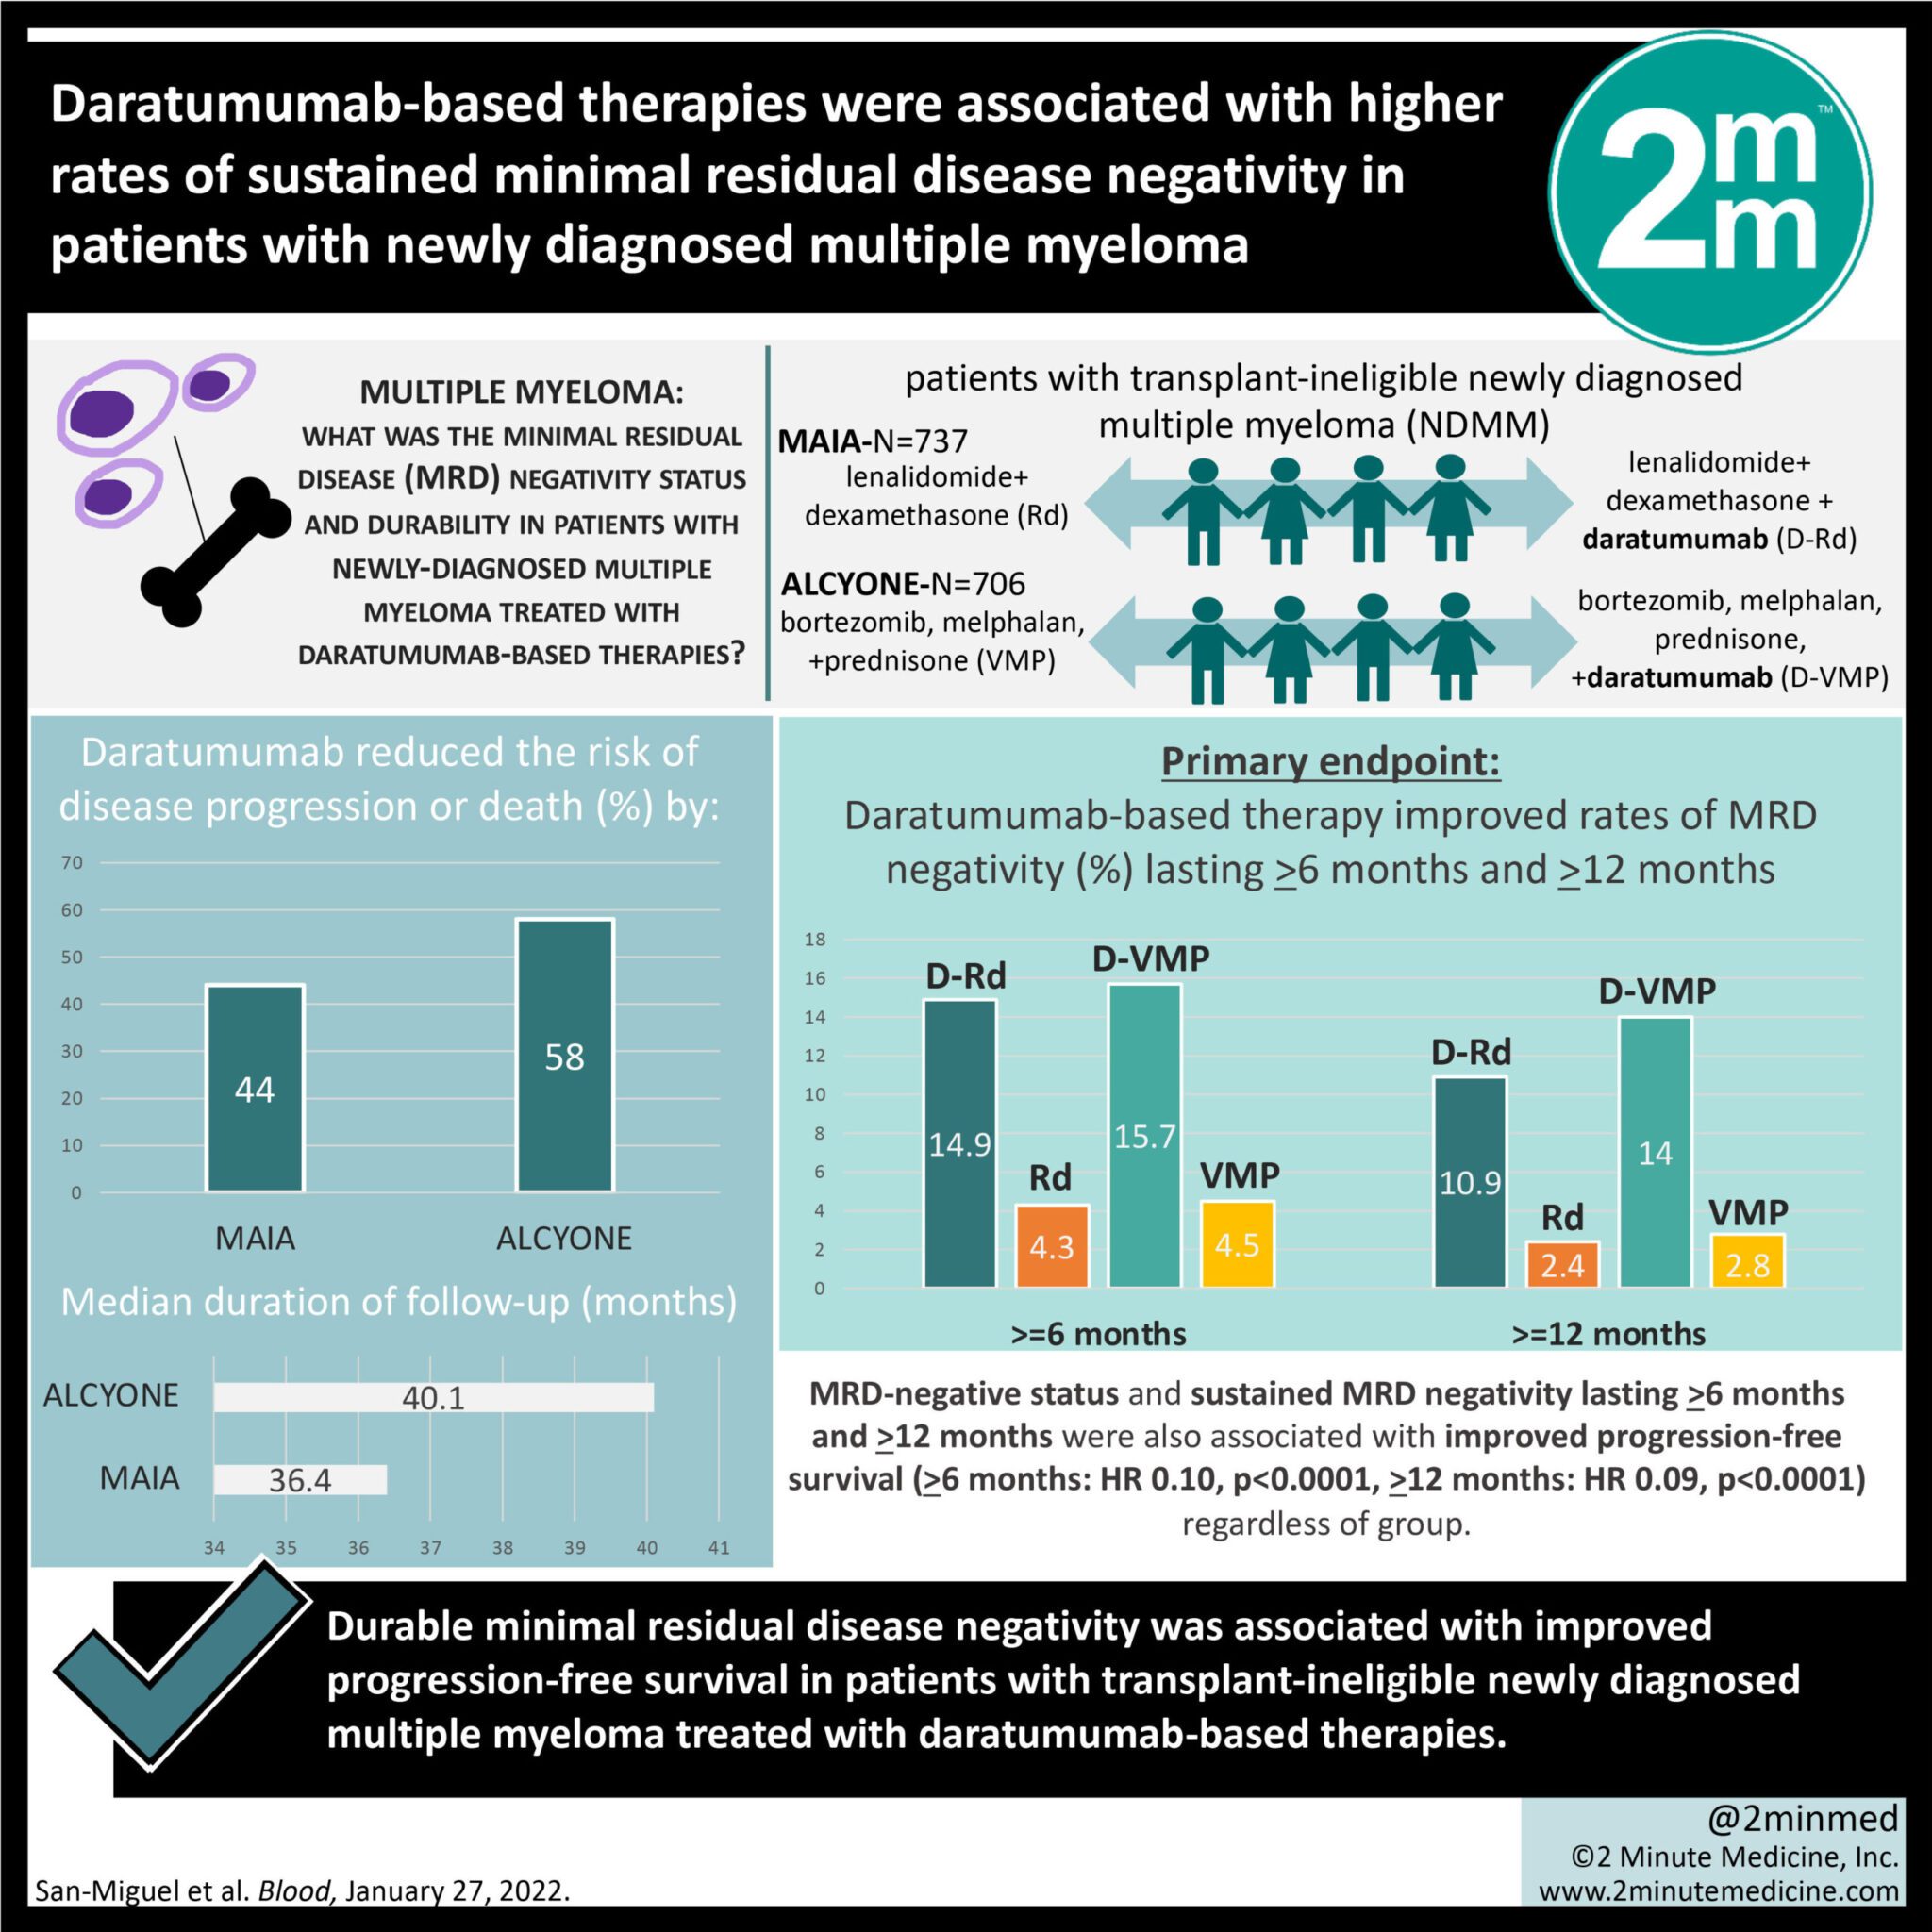 #VisualAbstract: Daratumumab-based therapies were associated with higher rates of sustained minimal residual disease negativity in patients with newly diagnosed multiple myeloma